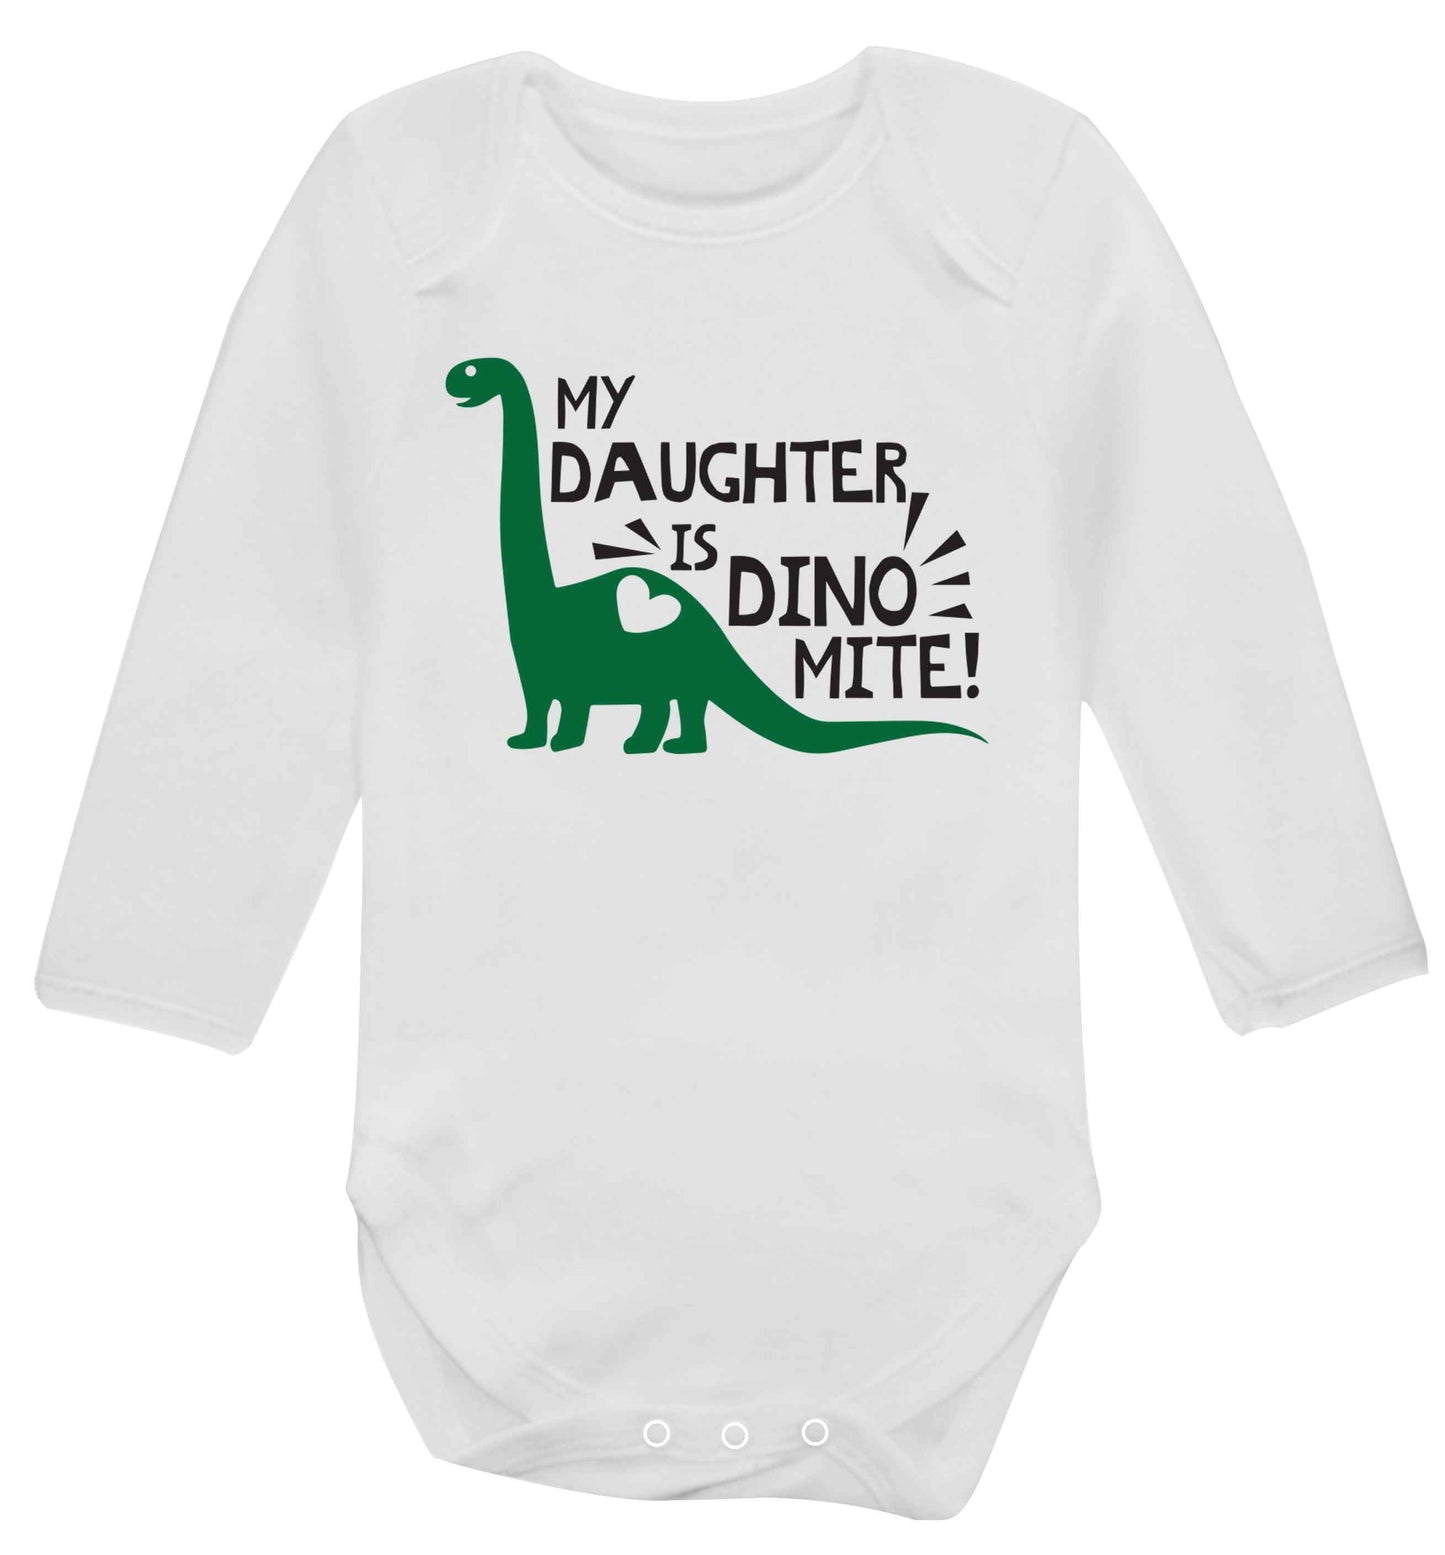 My daughter is dinomite! Baby Vest long sleeved white 6-12 months